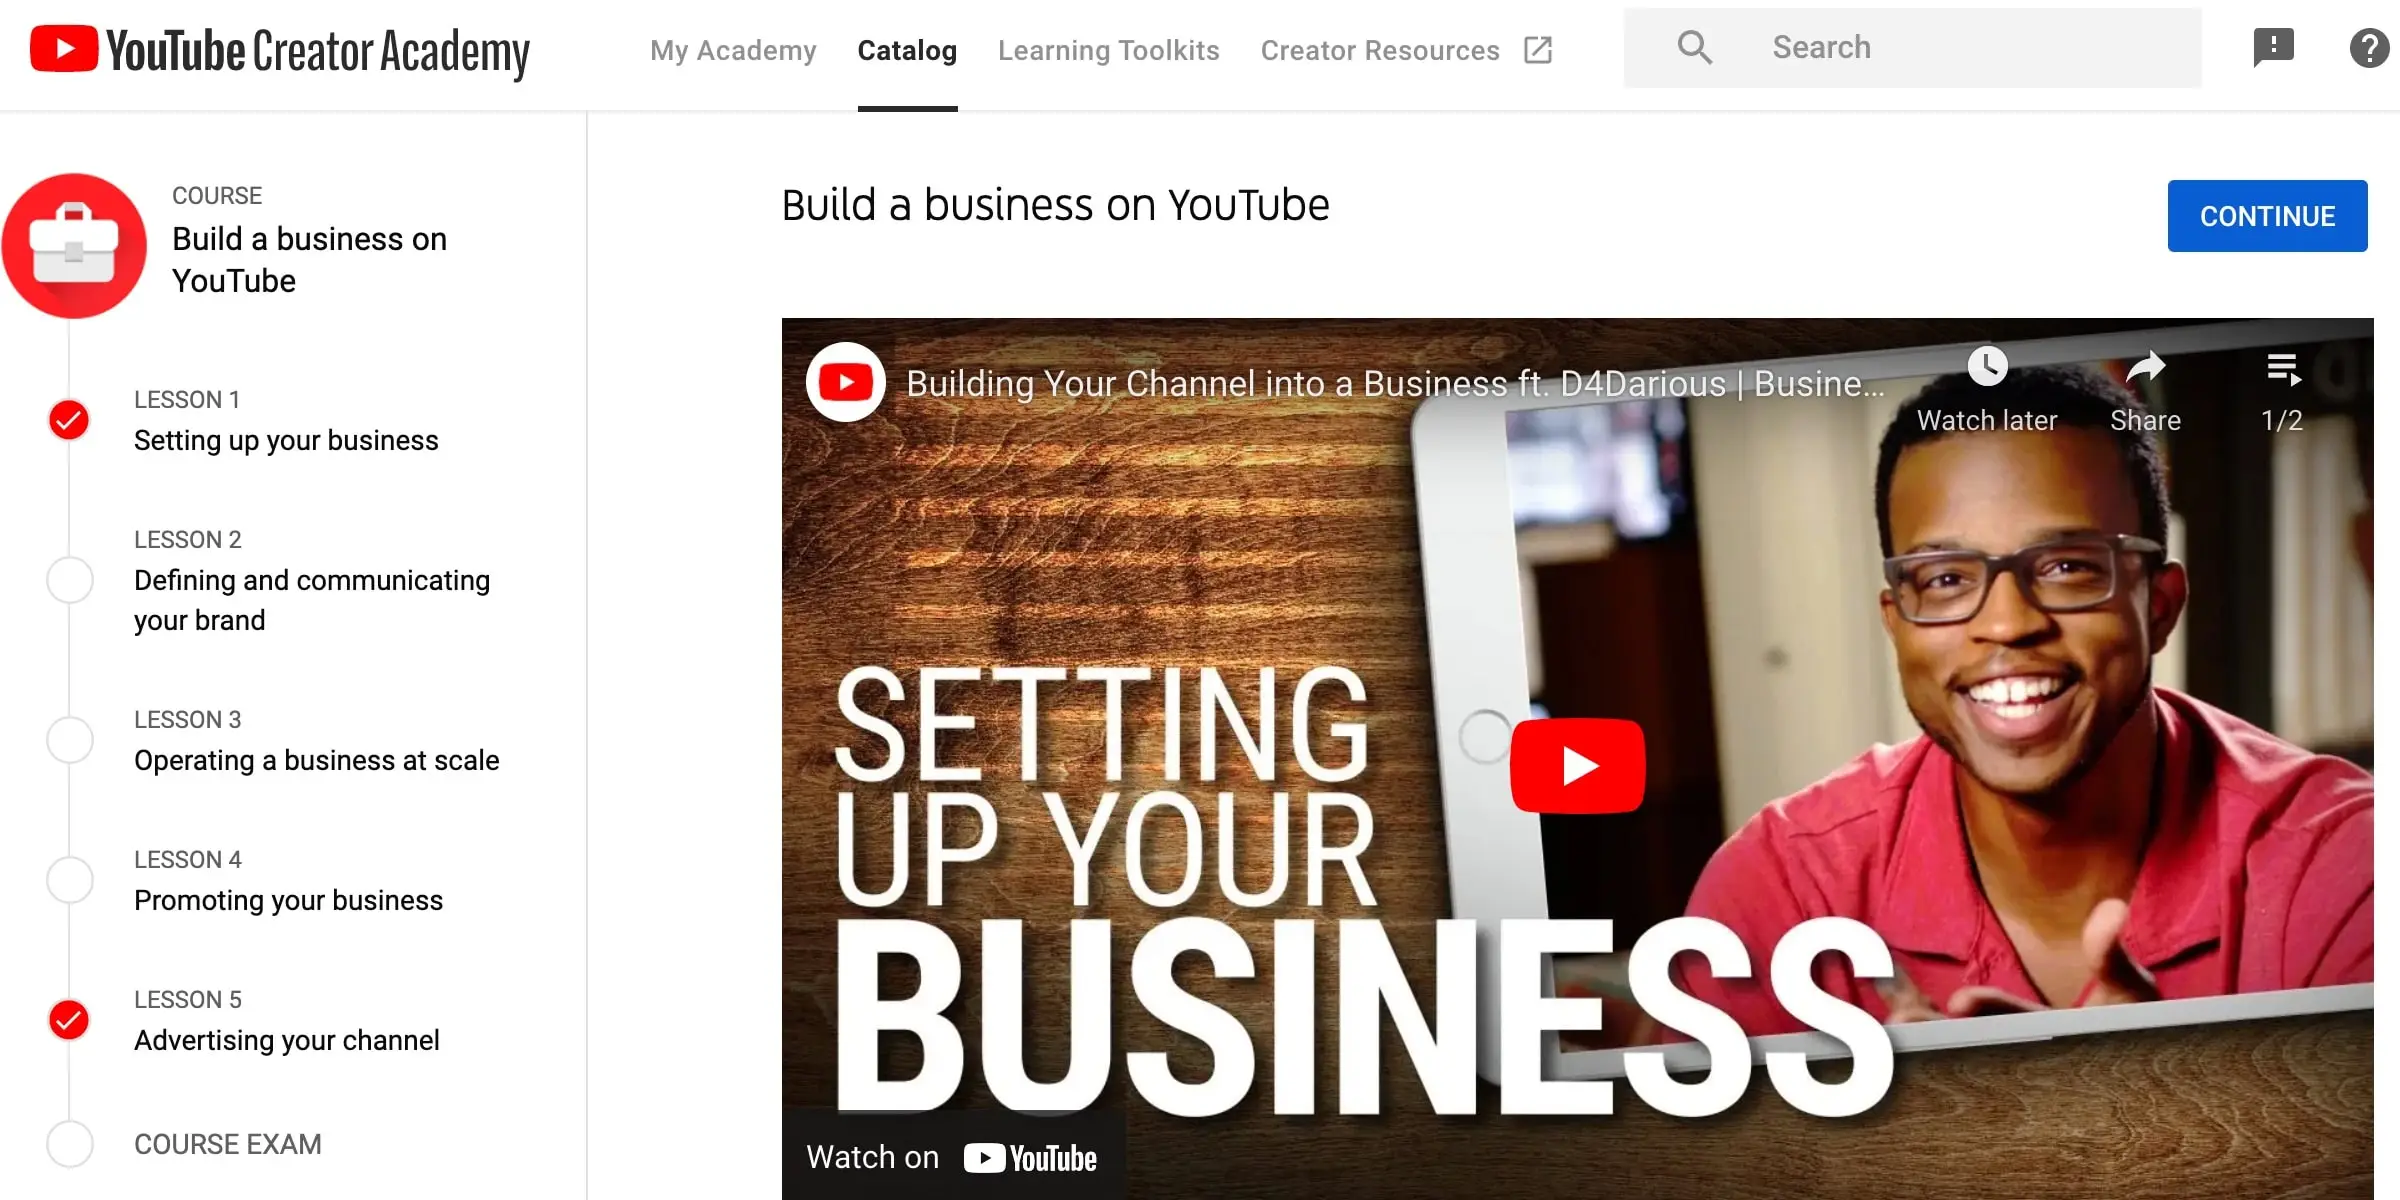 Build a Business on YouTube Course.